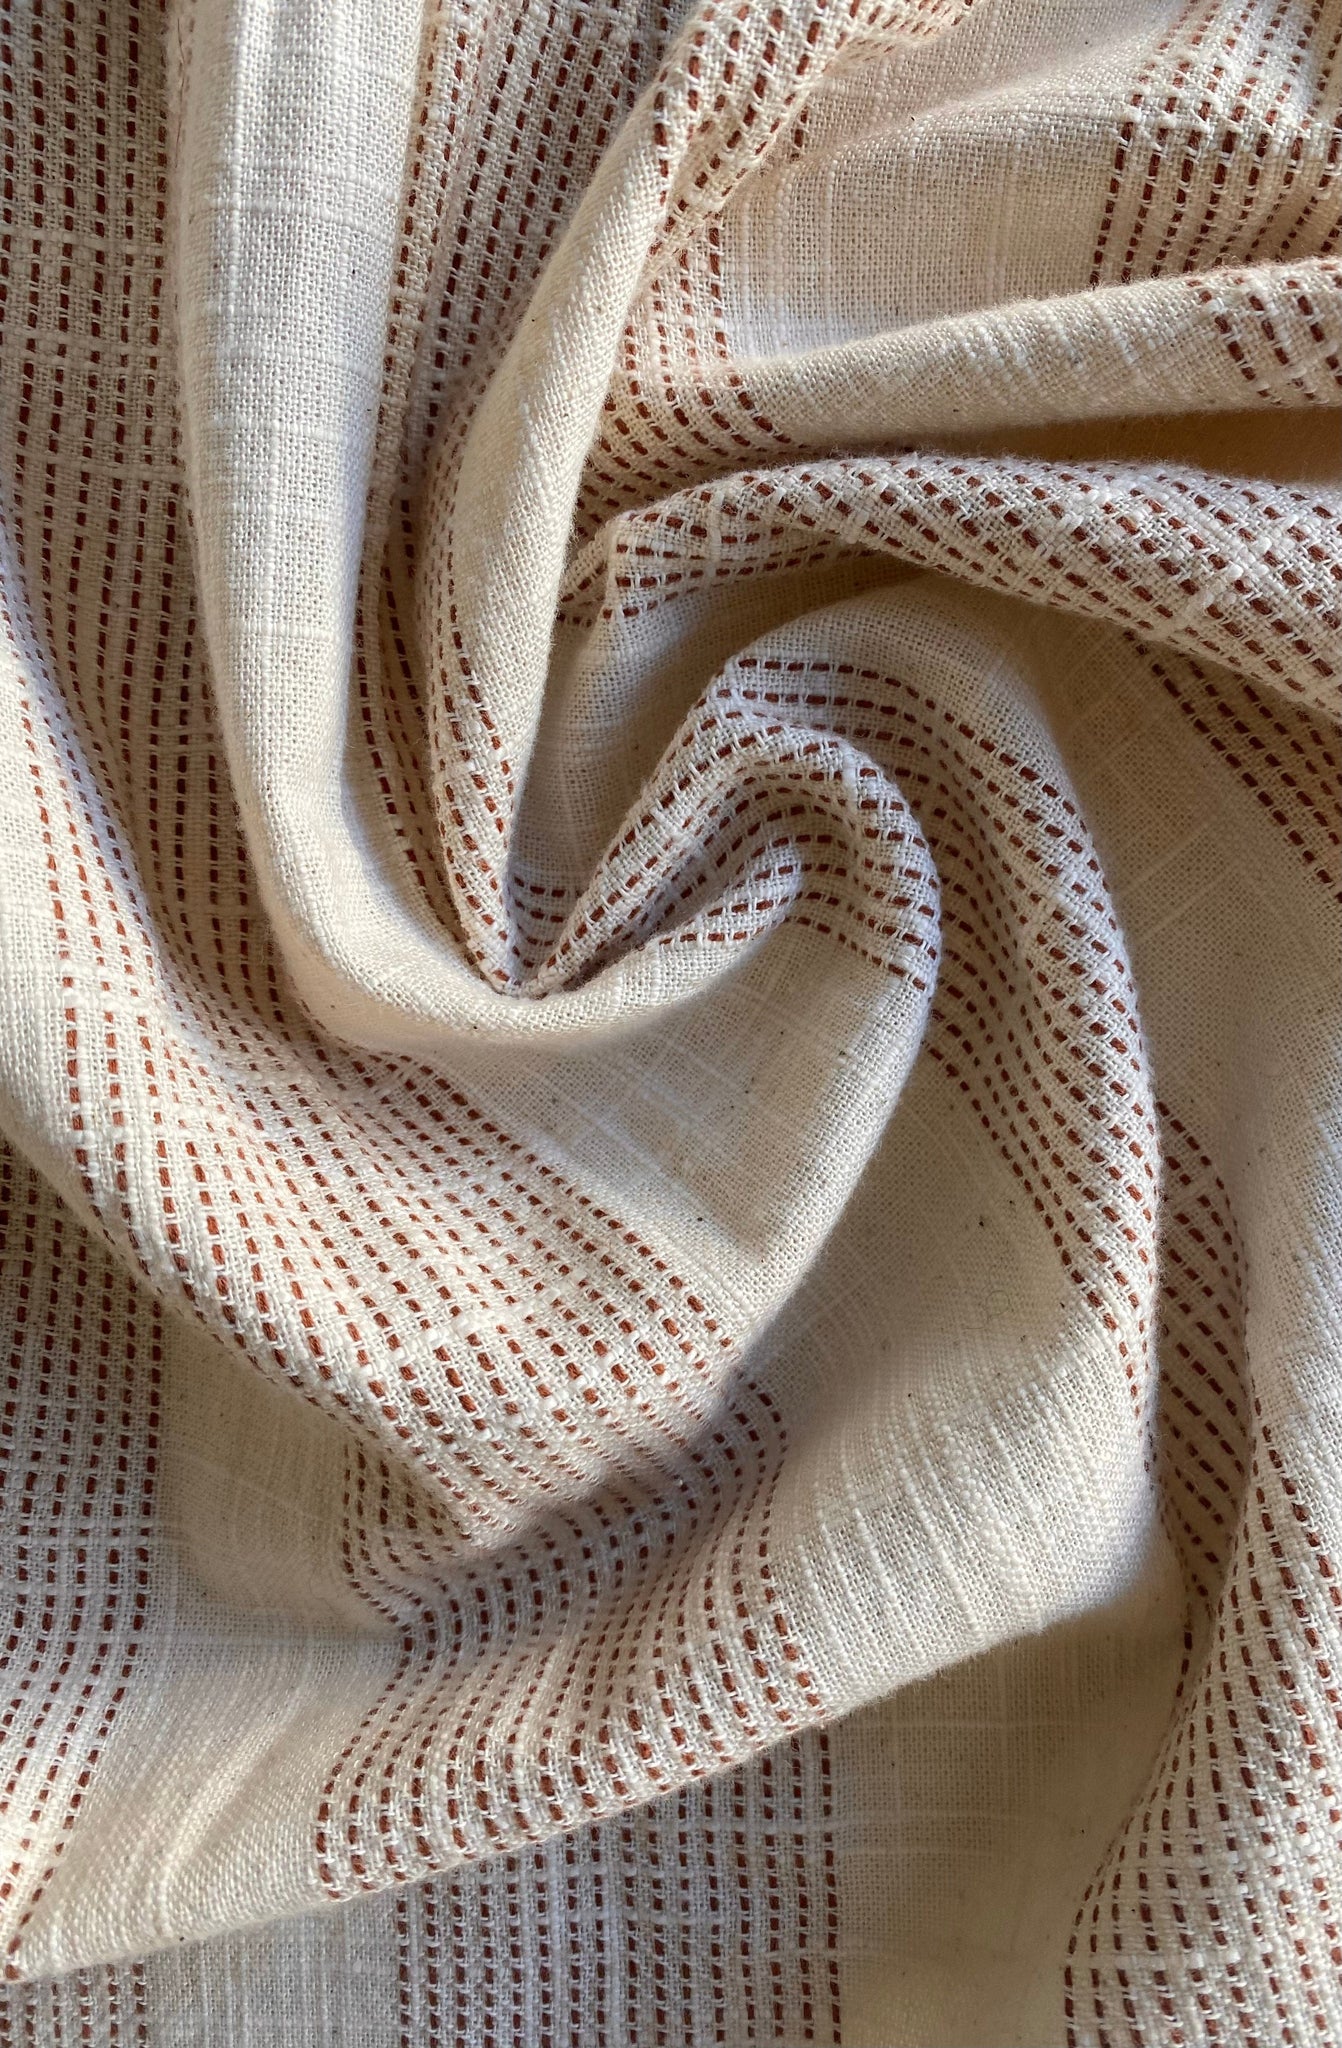 A close up of a beige and brown organic cotton fabric with Baker Top - Terracotta Ticking Stripe - Sample.